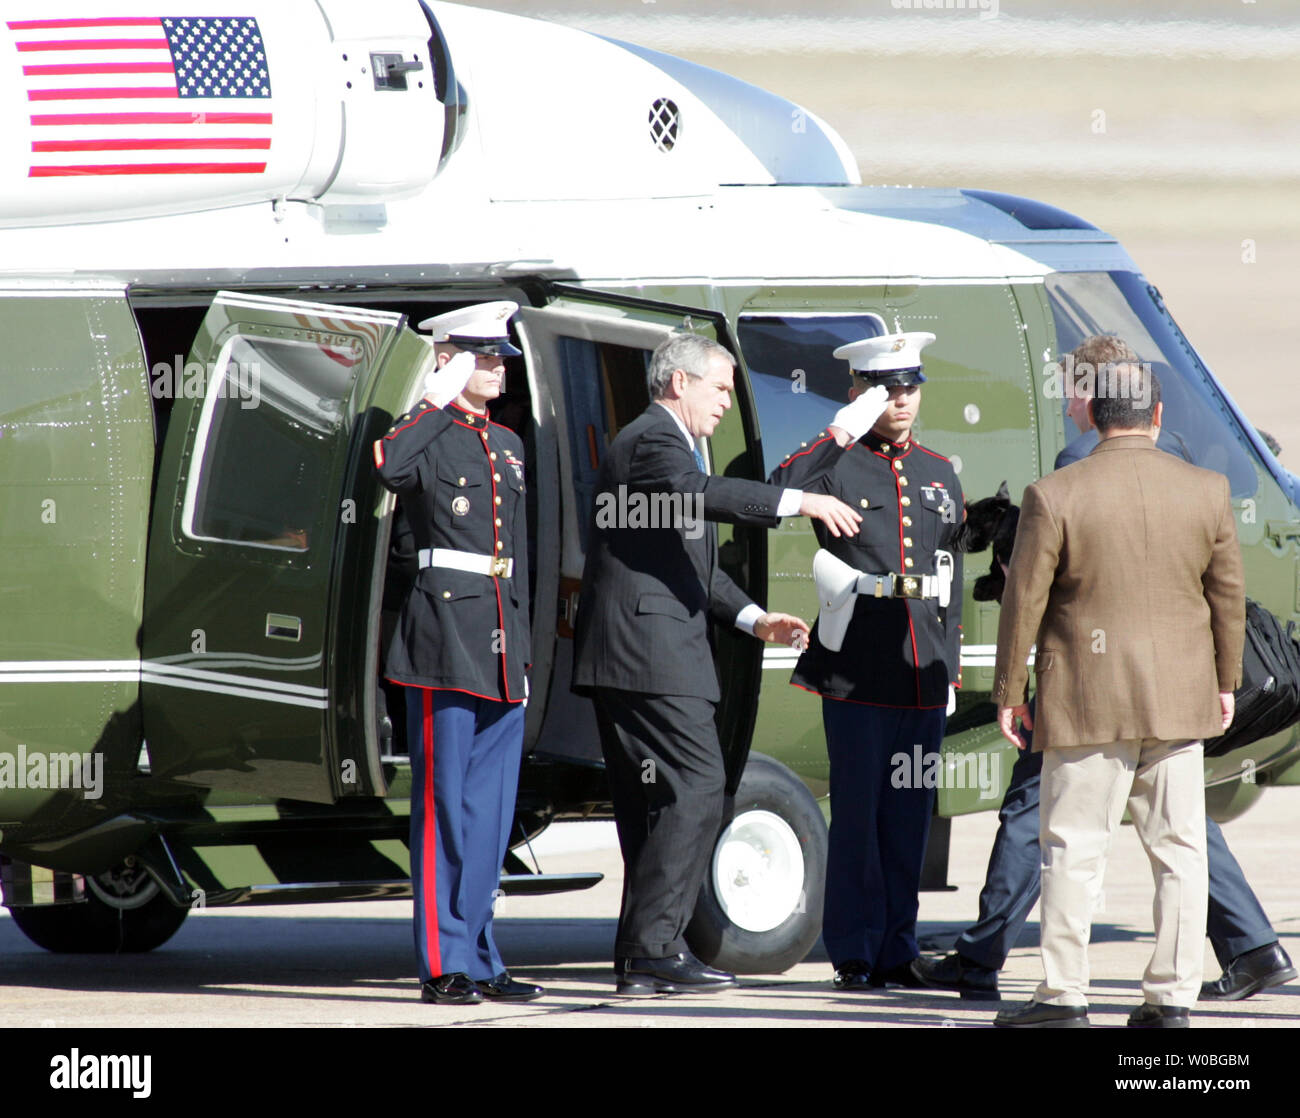 spike/kd   President George W. Bush arrives at the TSTC airport in Waco, Texas on December 26, 2006. The President accompanied by First Lady Laura Bush and her mother Jenna Welsh intend to spend the holiday's at his ranch in Crawford, Texas. (UPI Photo/Ron Russek II) Stock Photo